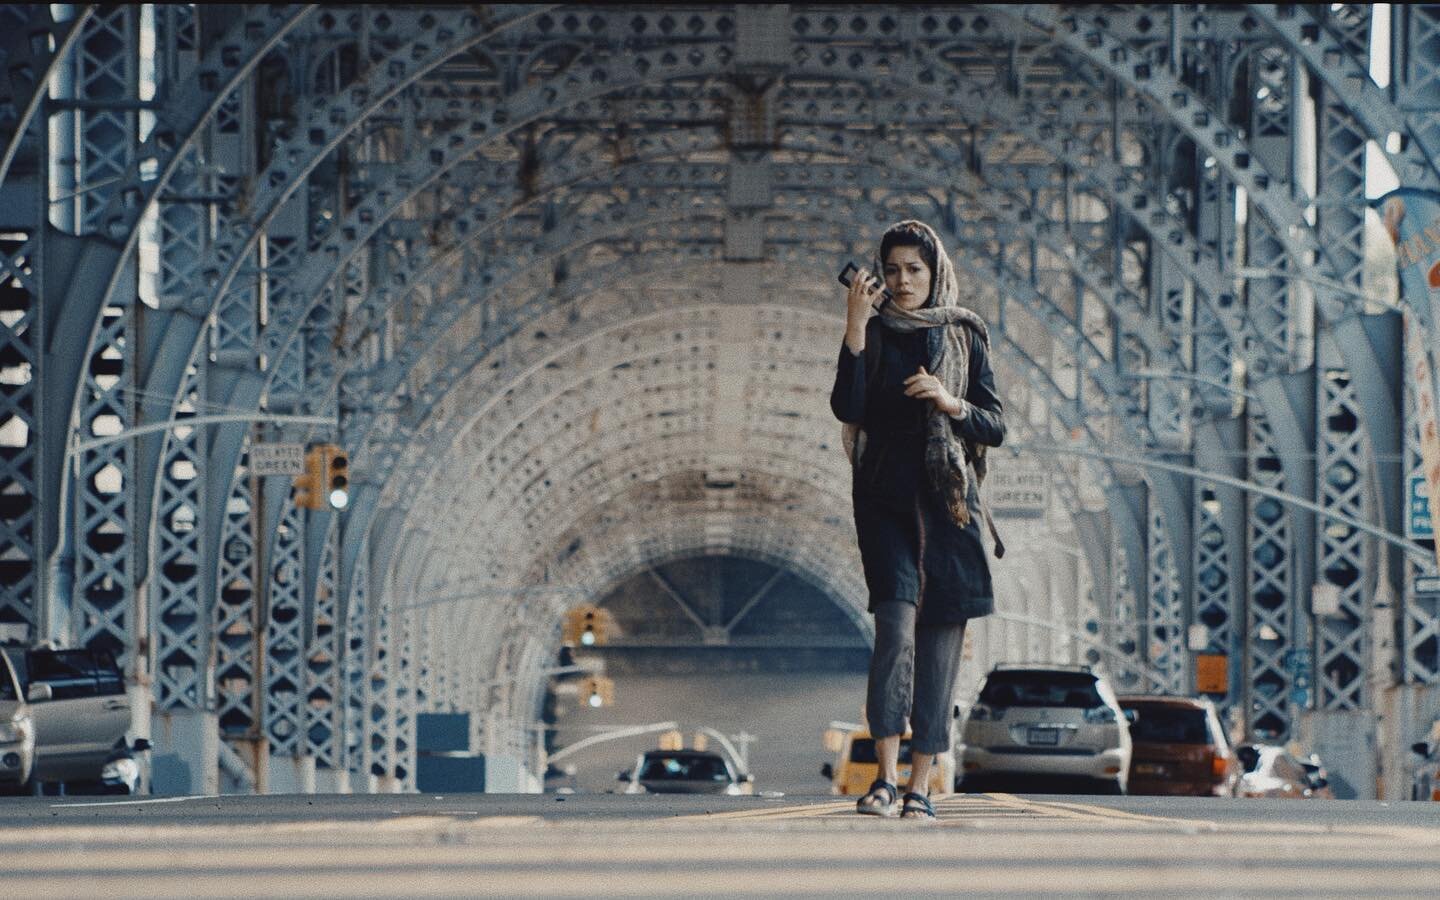 STAND CLEAR OF THE CLOSING DOORS //
Dir. @motamediafilms
Talent: @awni_ooni 
Directing Exercise # 1

#nyu #gradfilm #vfx #nyc #iran #cinematography #redepic #vintagelens